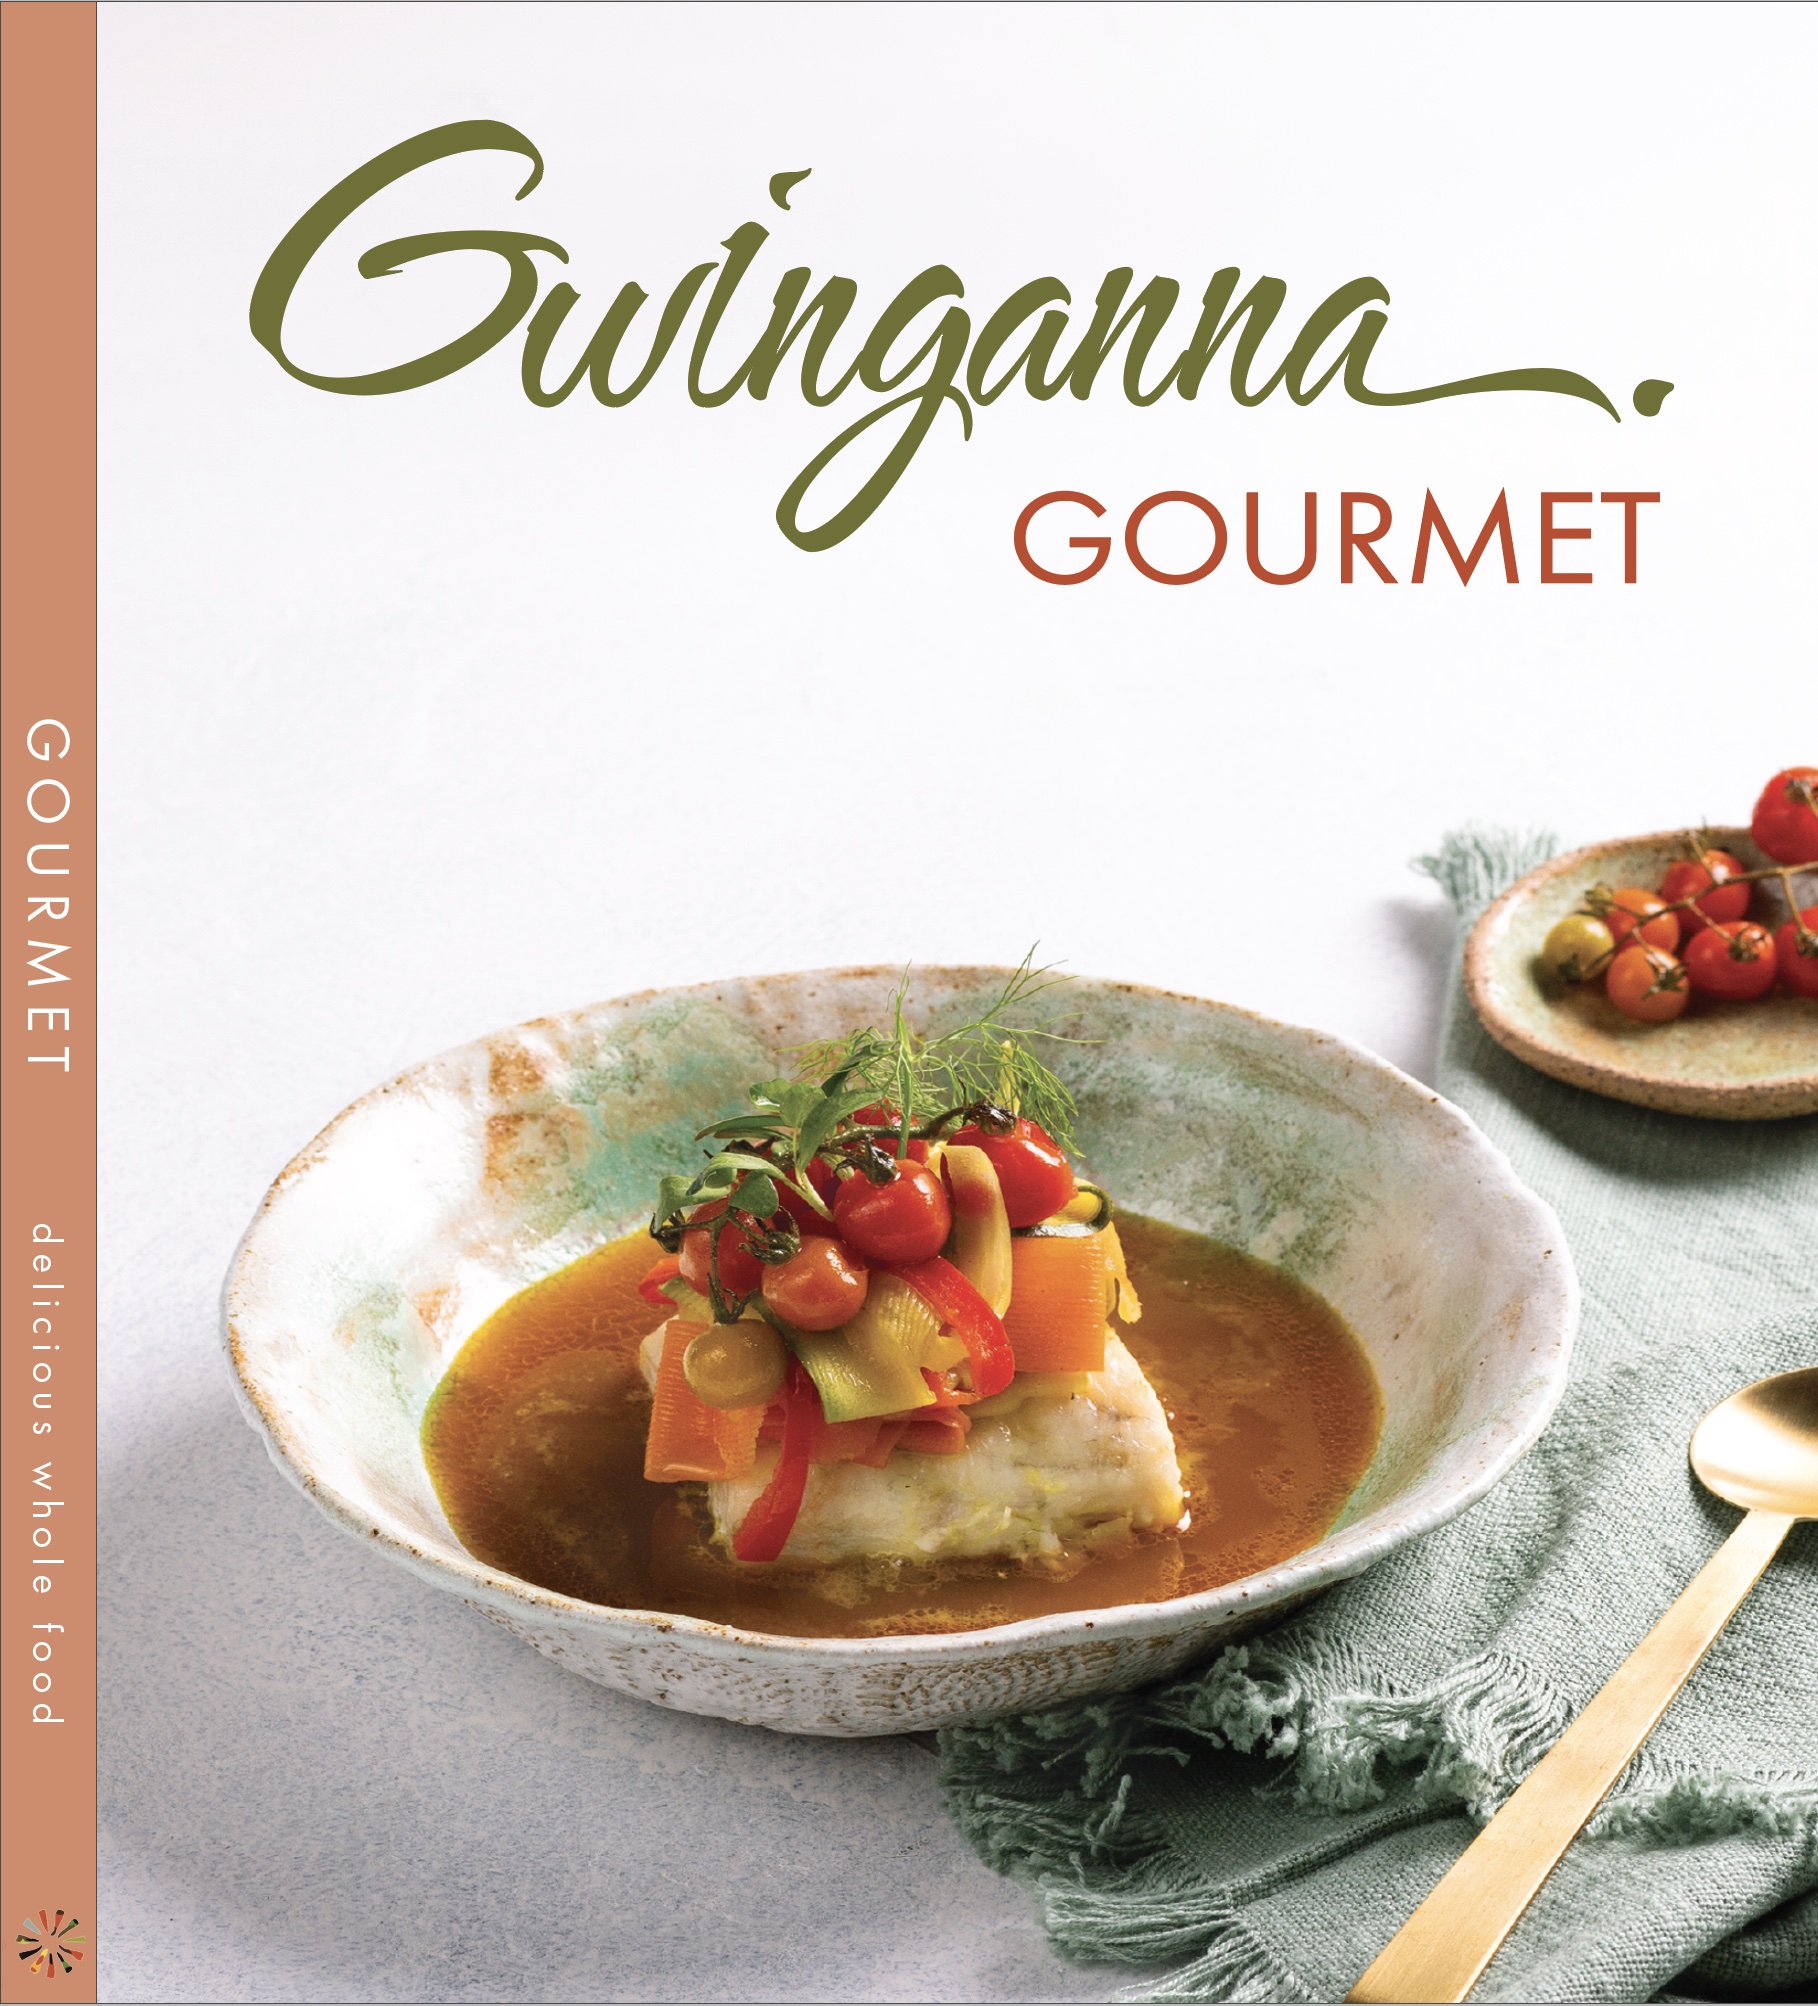 Gwinganna Gourmet cookbook production by Nelly le Comte and Sam Gowing